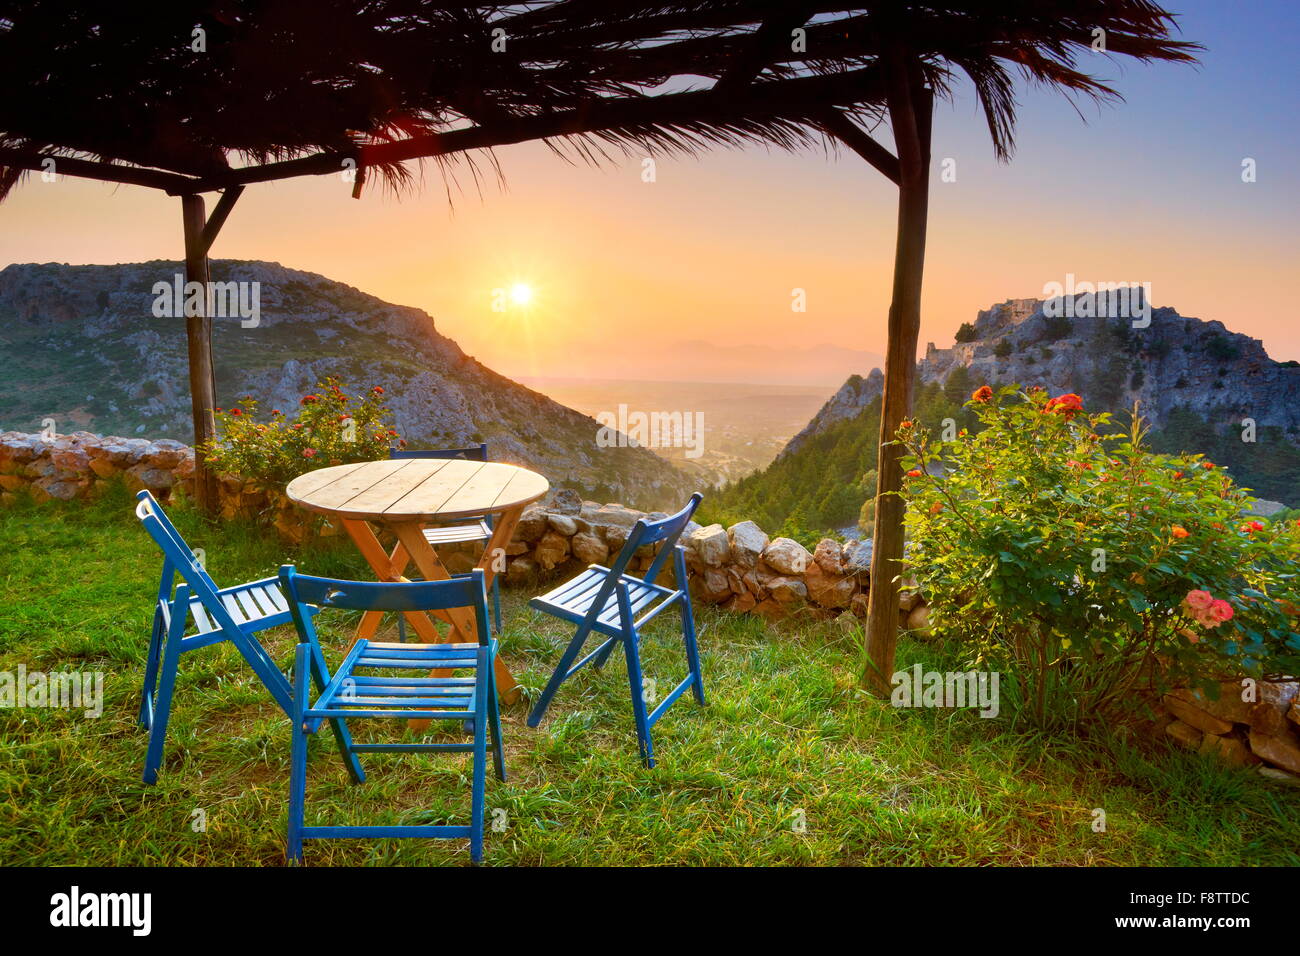 Kos - Dodecanese Islands, Greece, sunset from Old Pili village tavern Stock Photo